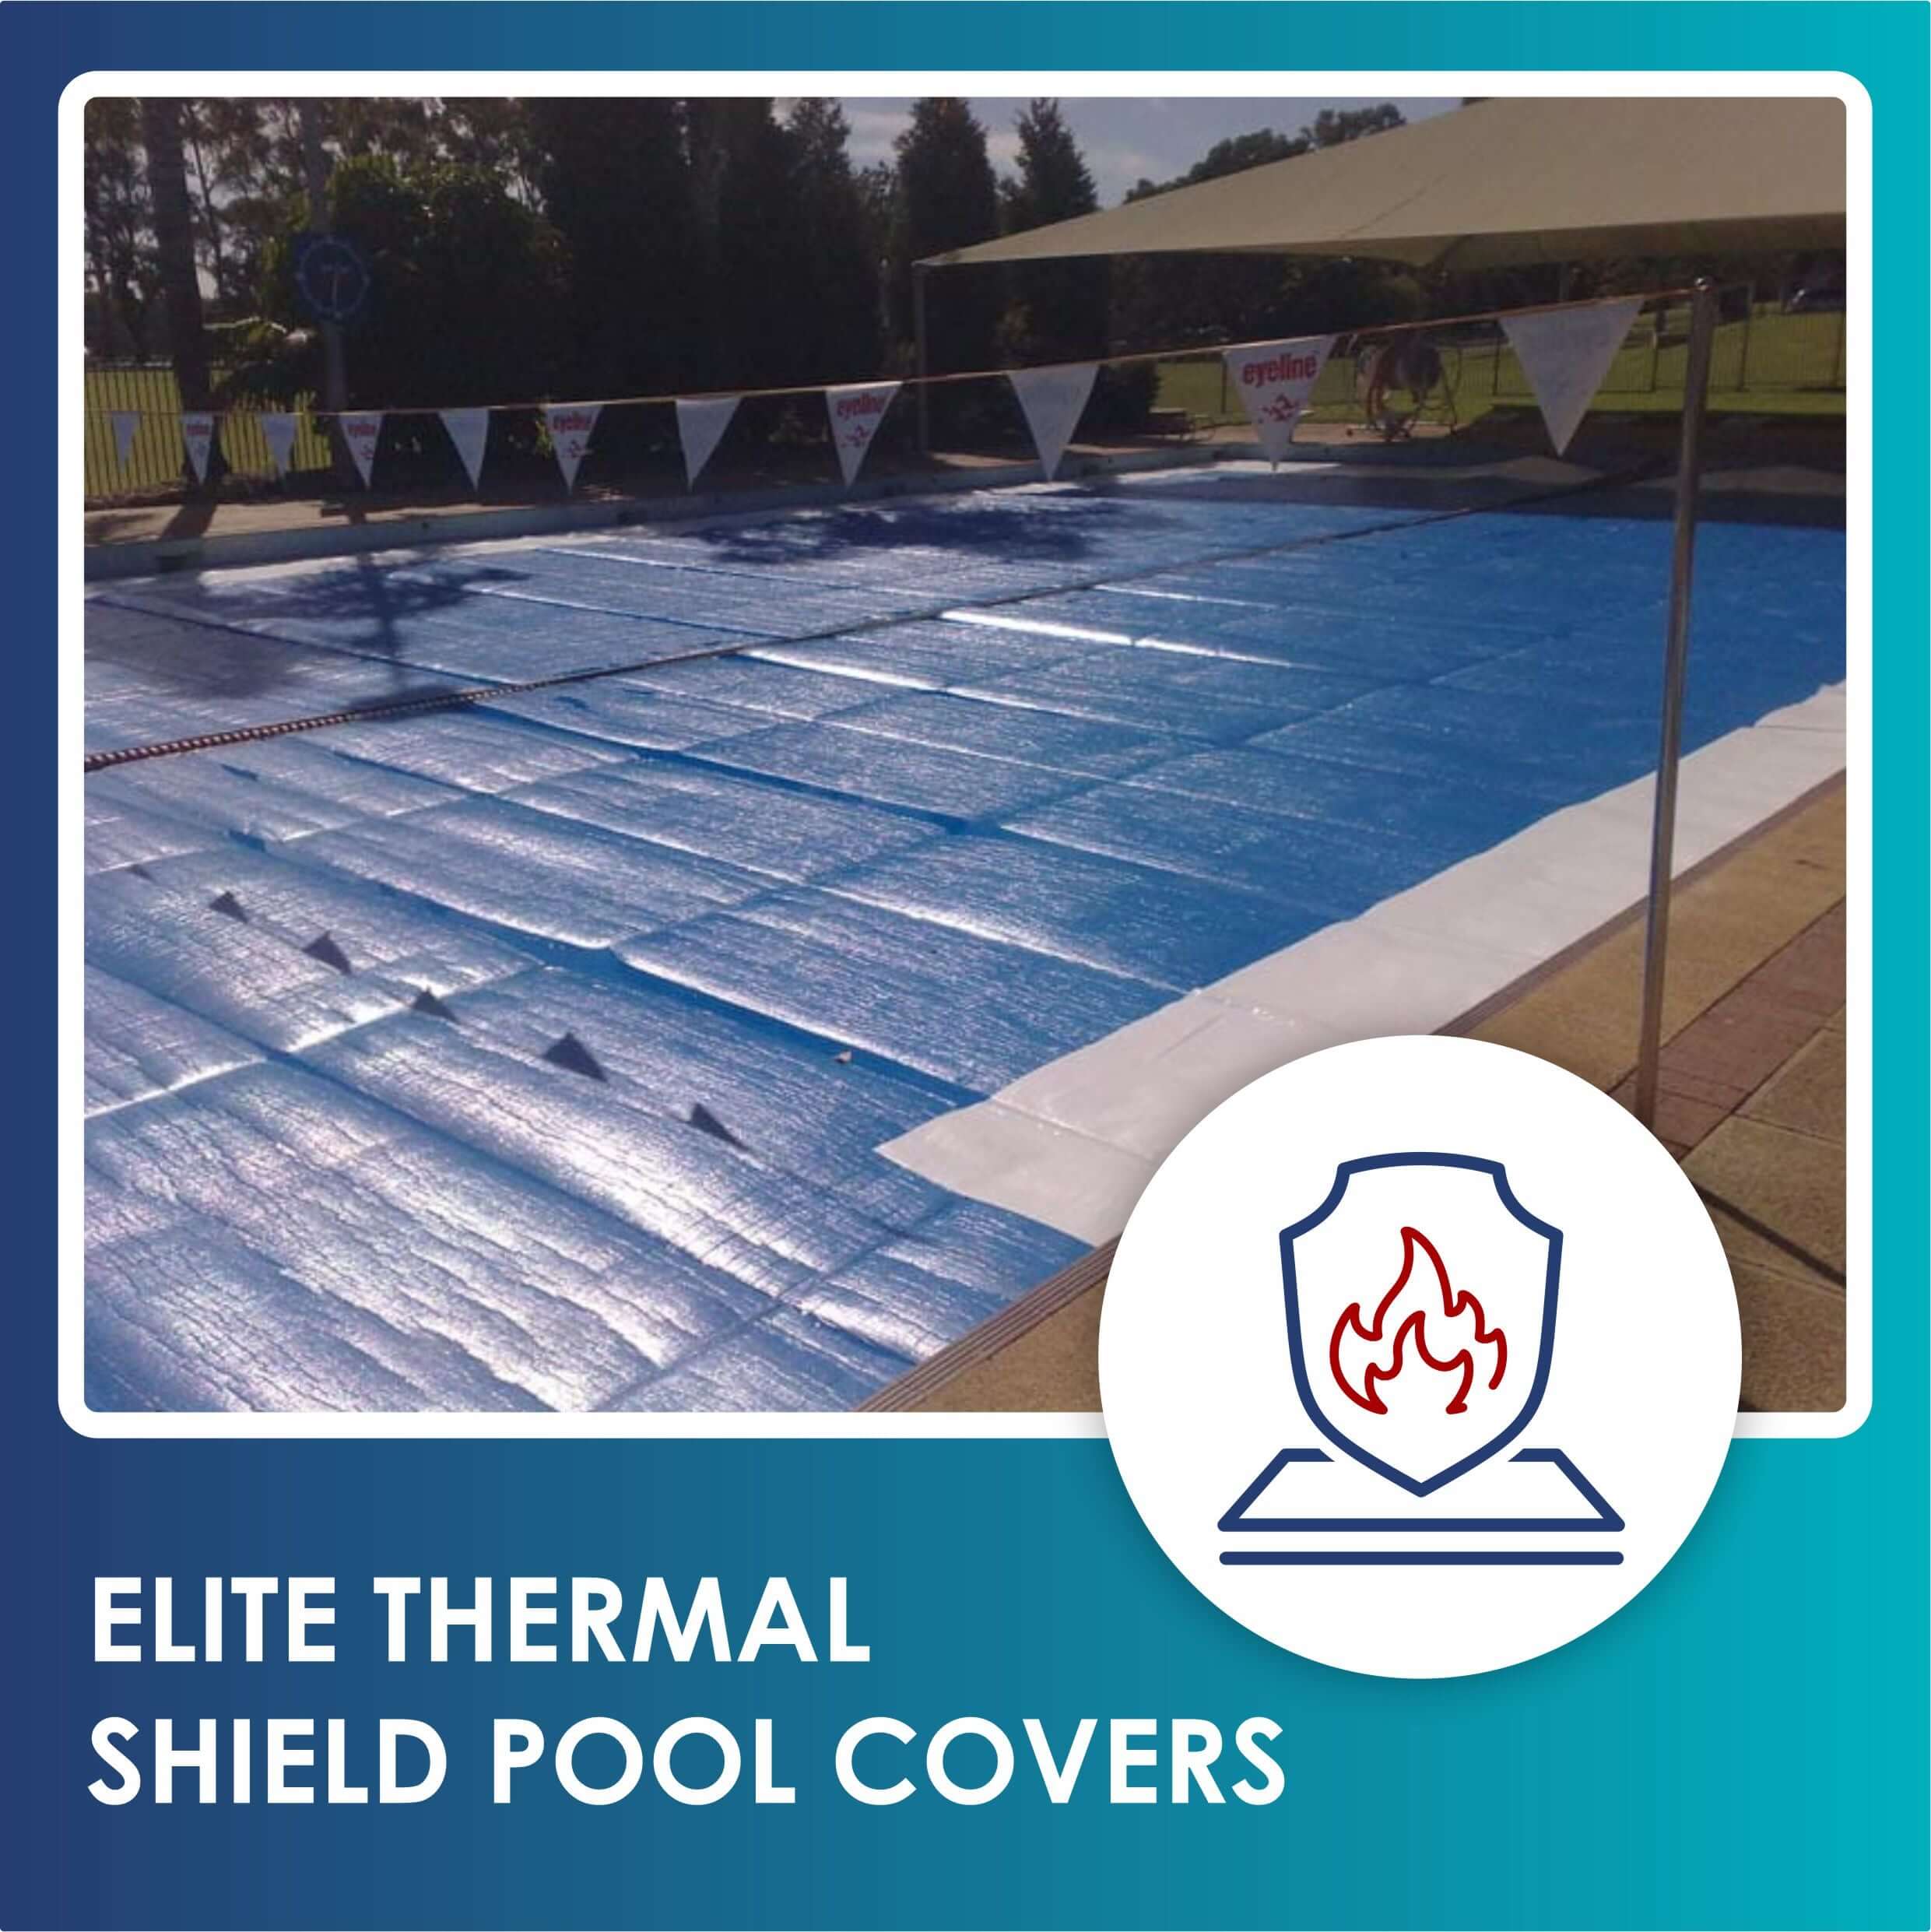 Elite thermal shield pool cover on a commercial pool